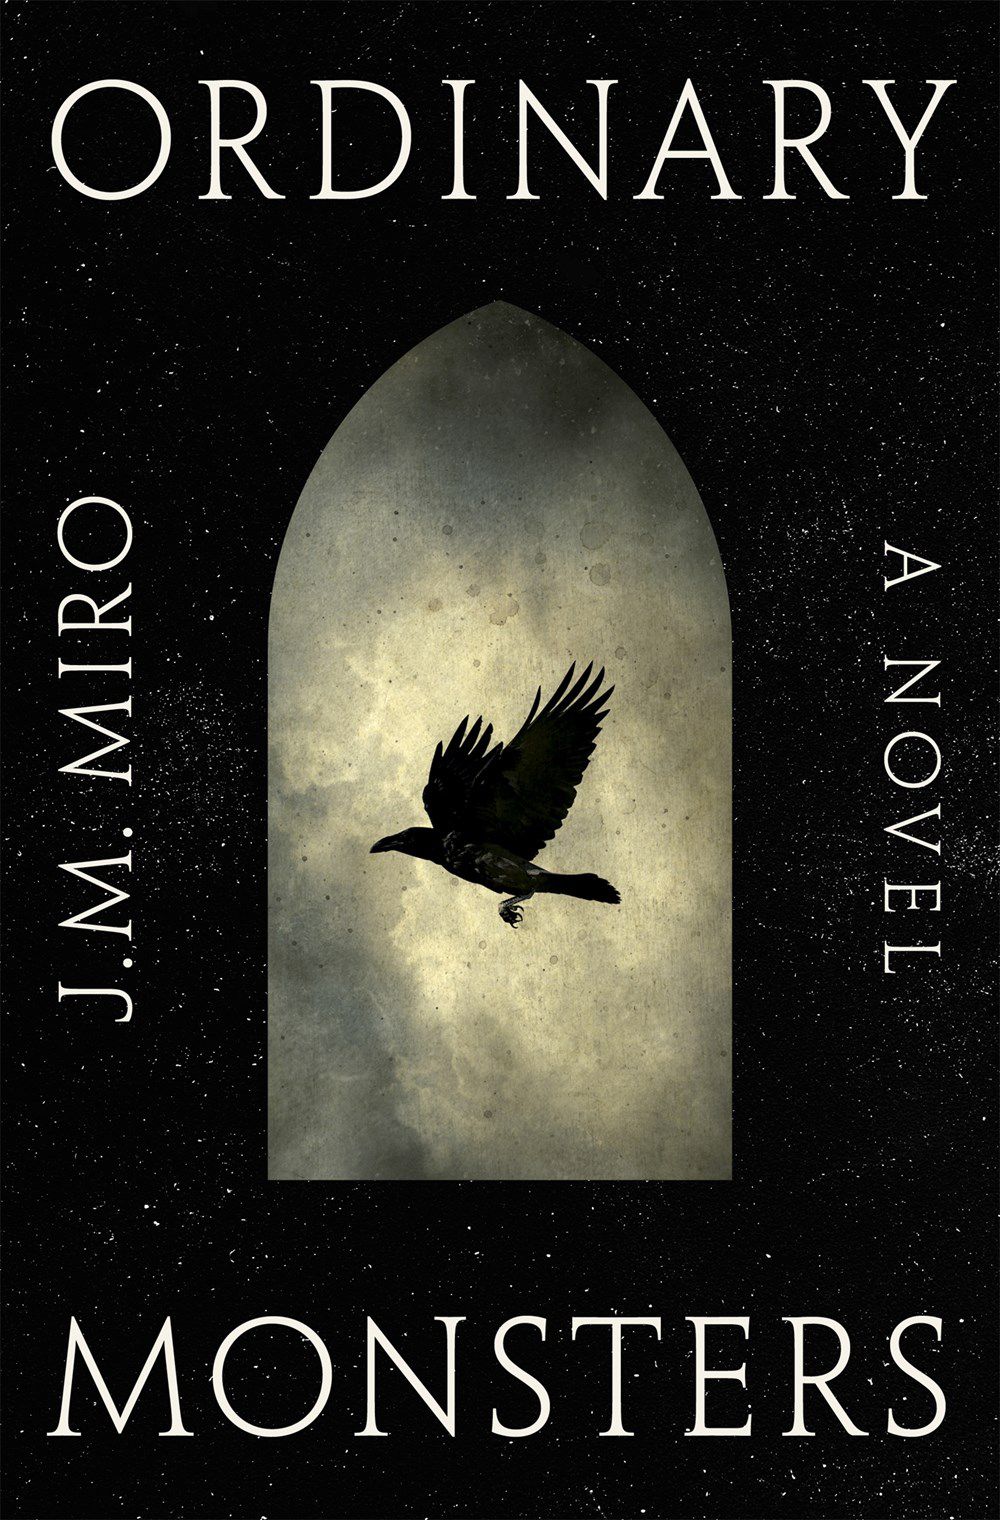 Cover art for Ordinary Monsters by JM Miro, featuring a black bird flying against a background of clouds and the night sky.